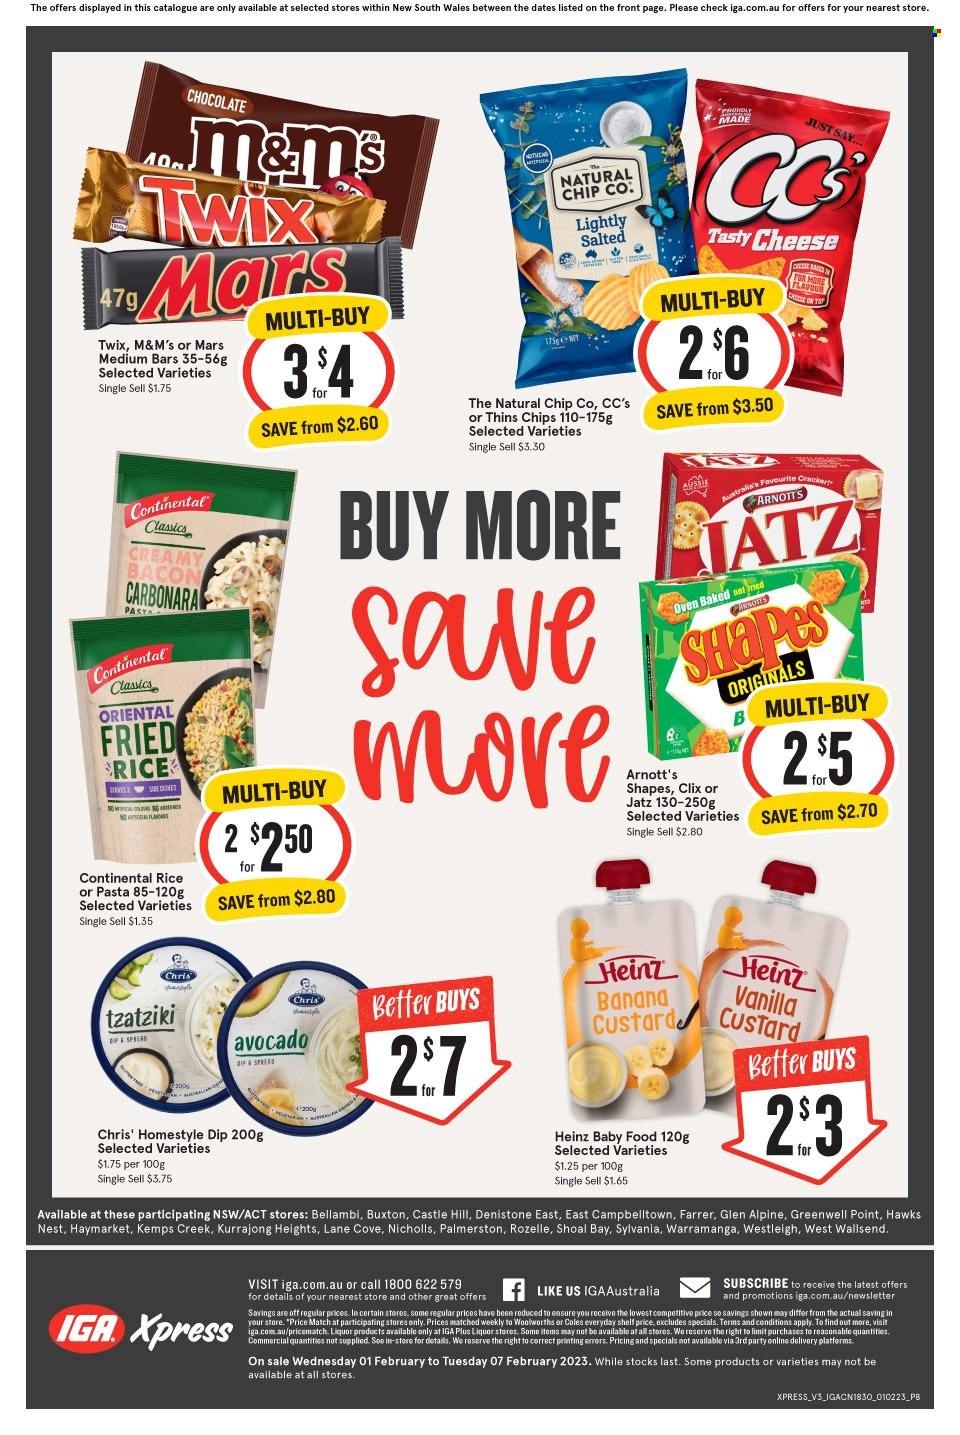 thumbnail - IGA Xpress Catalogue - 1 Feb 2023 - 7 Feb 2023 - Sales products - avocado, Continental, bacon, tzatziki, cheese, Kemps, custard, chocolate, Twix, Mars, M&M's, crackers, chips, Thins, Heinz, Castle, Aussie. Page 2.